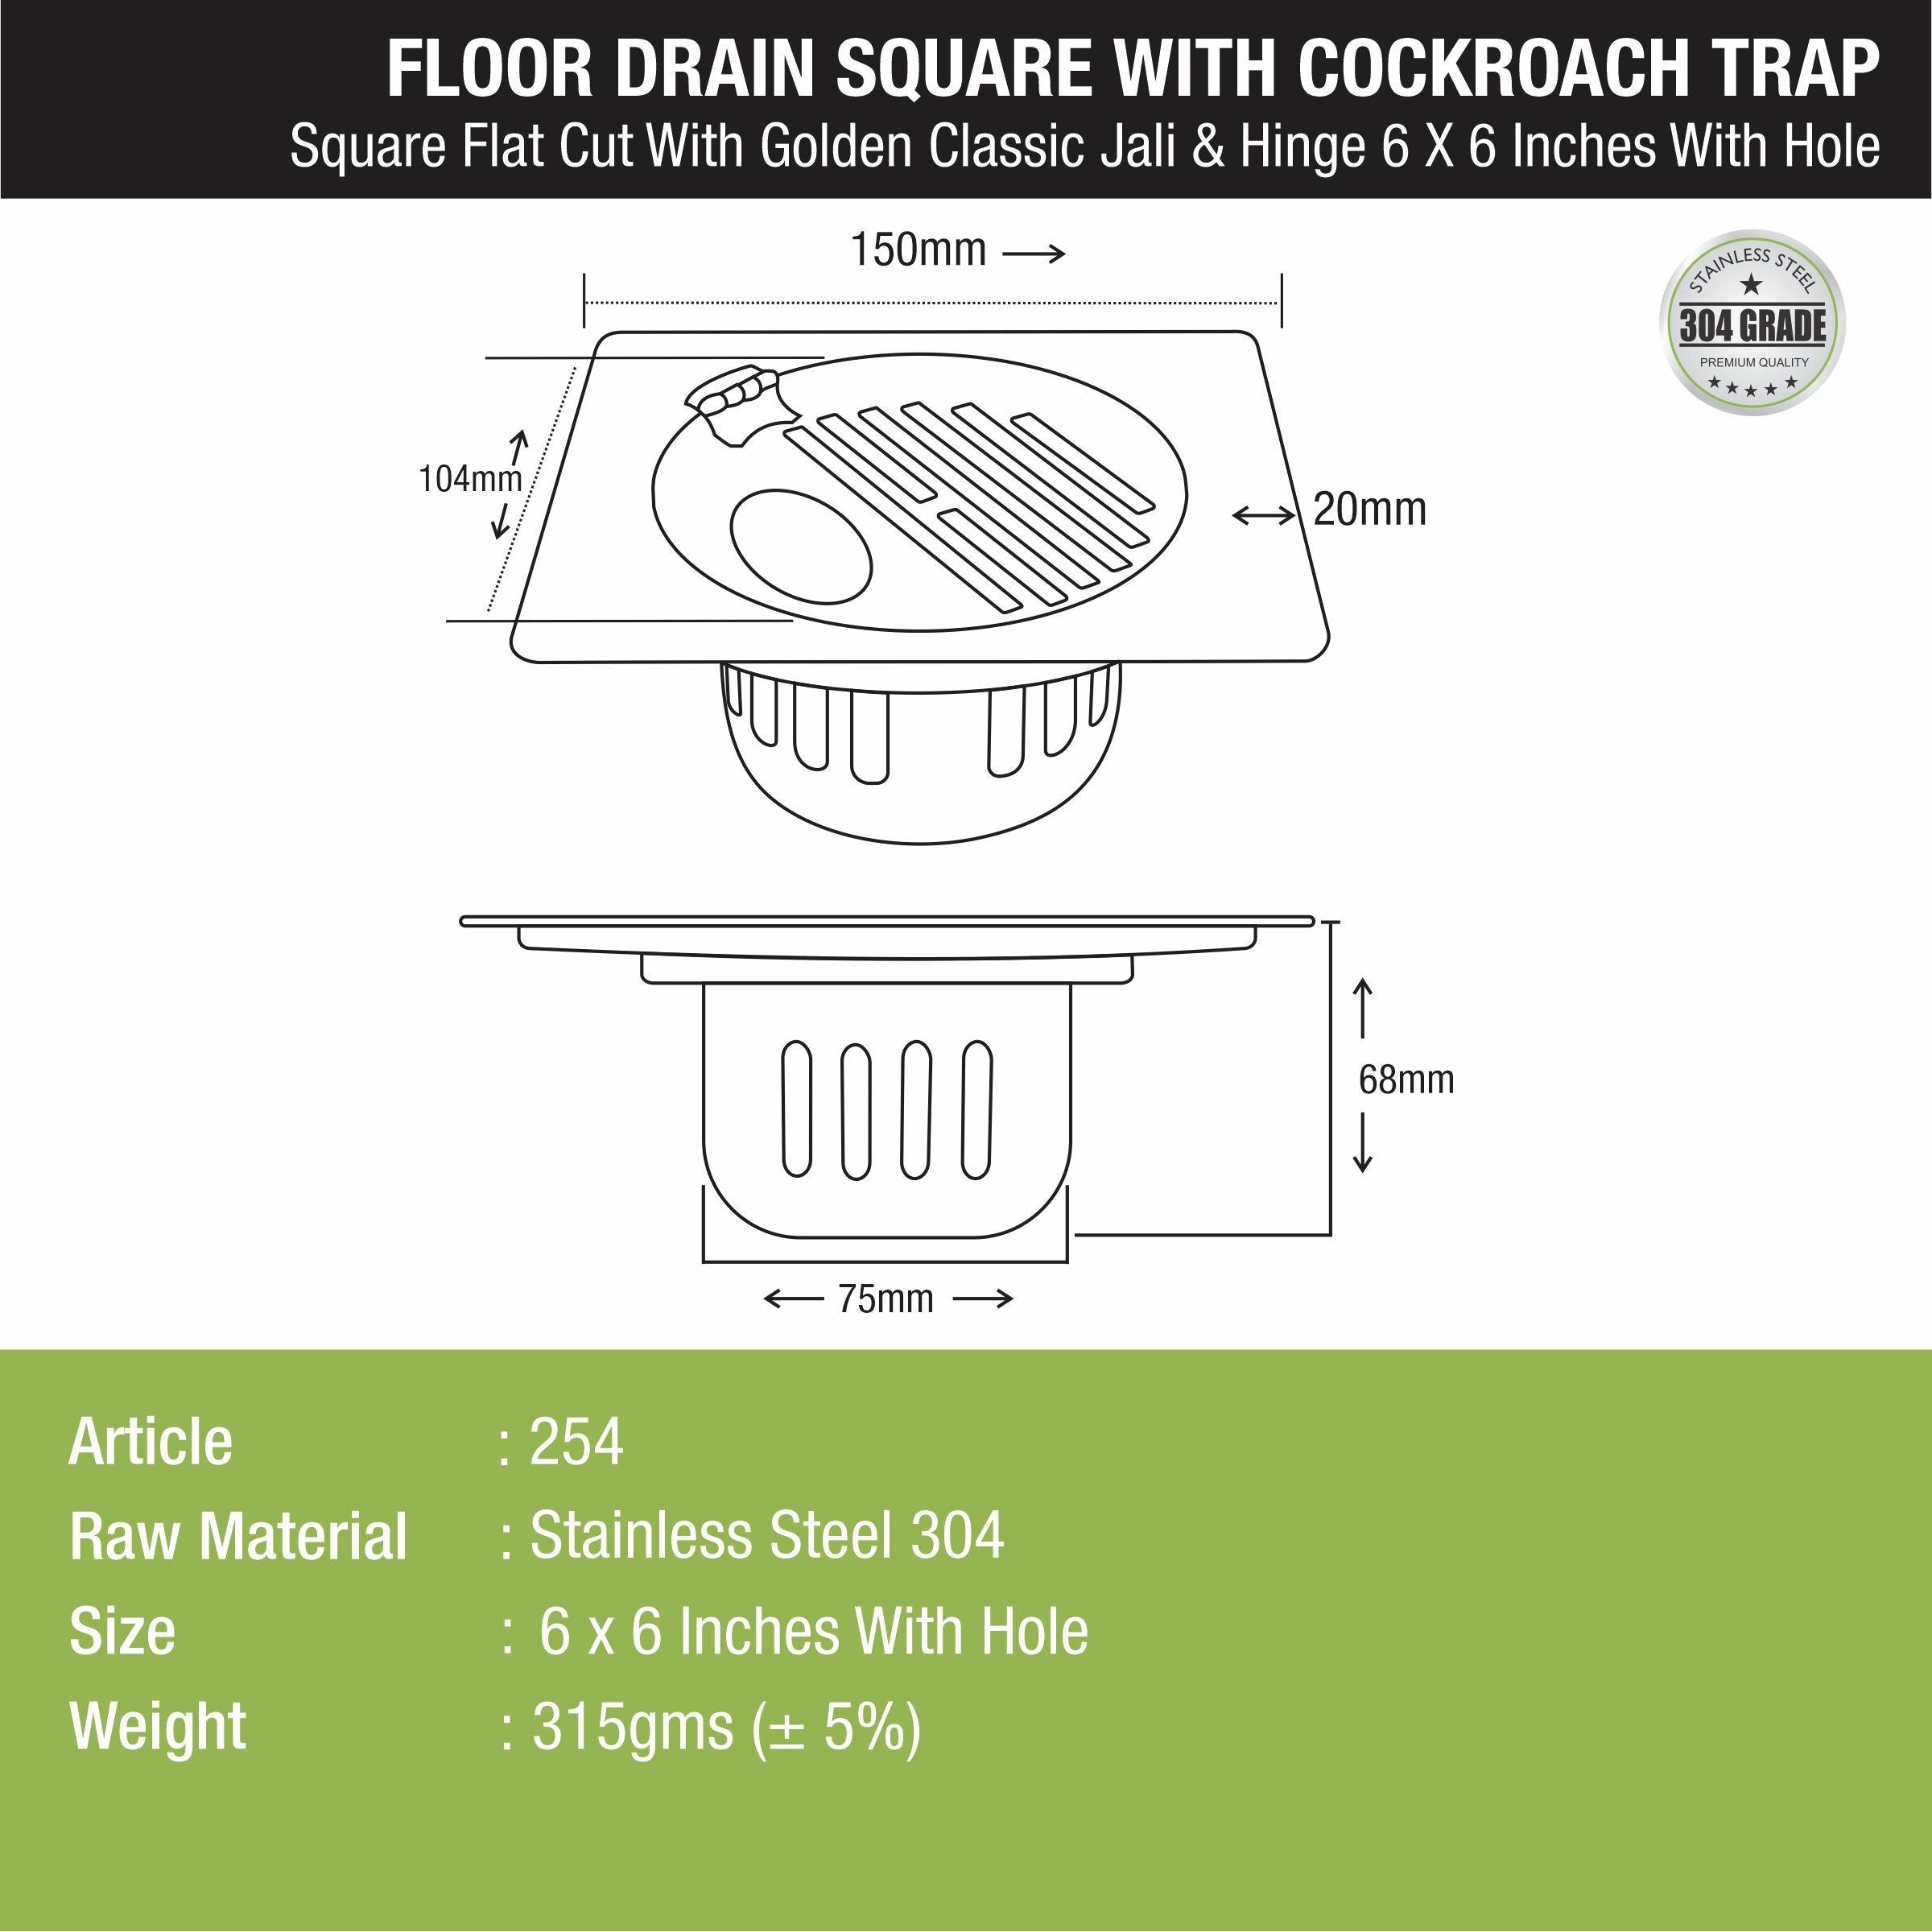 Golden Classic Jali Square Flat Cut Floor Drain (6 x 6 Inches) with Hinge, Hole and Cockroach Trap - LIPKA - Lipka Home